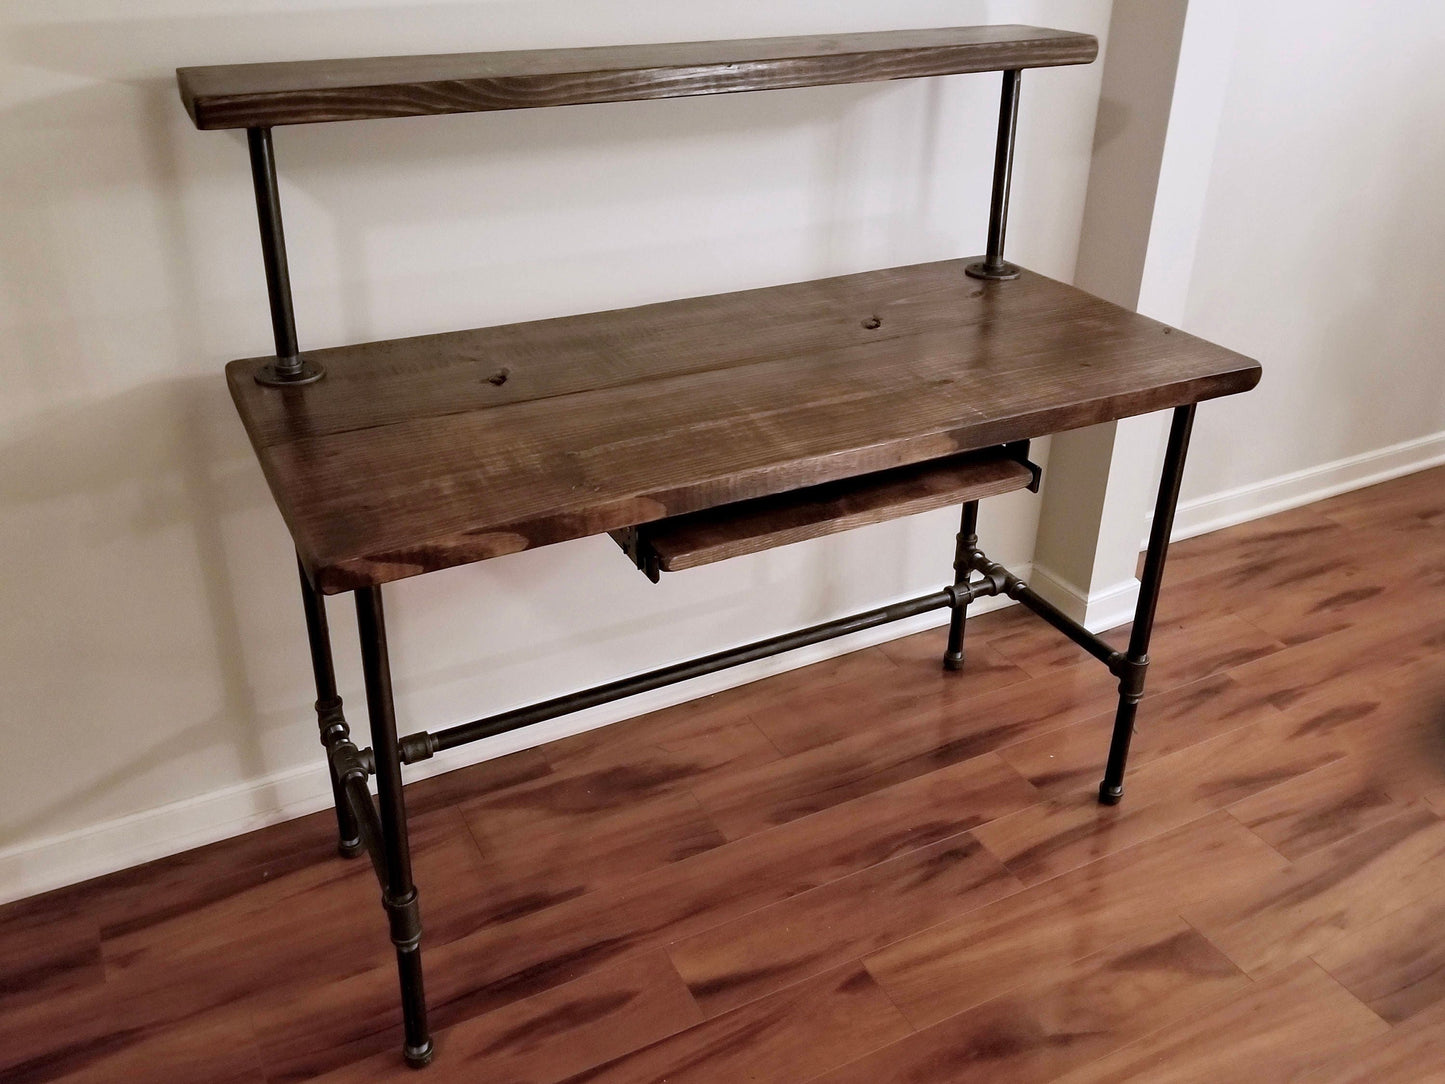 Steel and Wood Desk - Office Iron Pipe Desk with Monitor Shelf and Keyboard Tray - Shelf Height Options Listed in Description